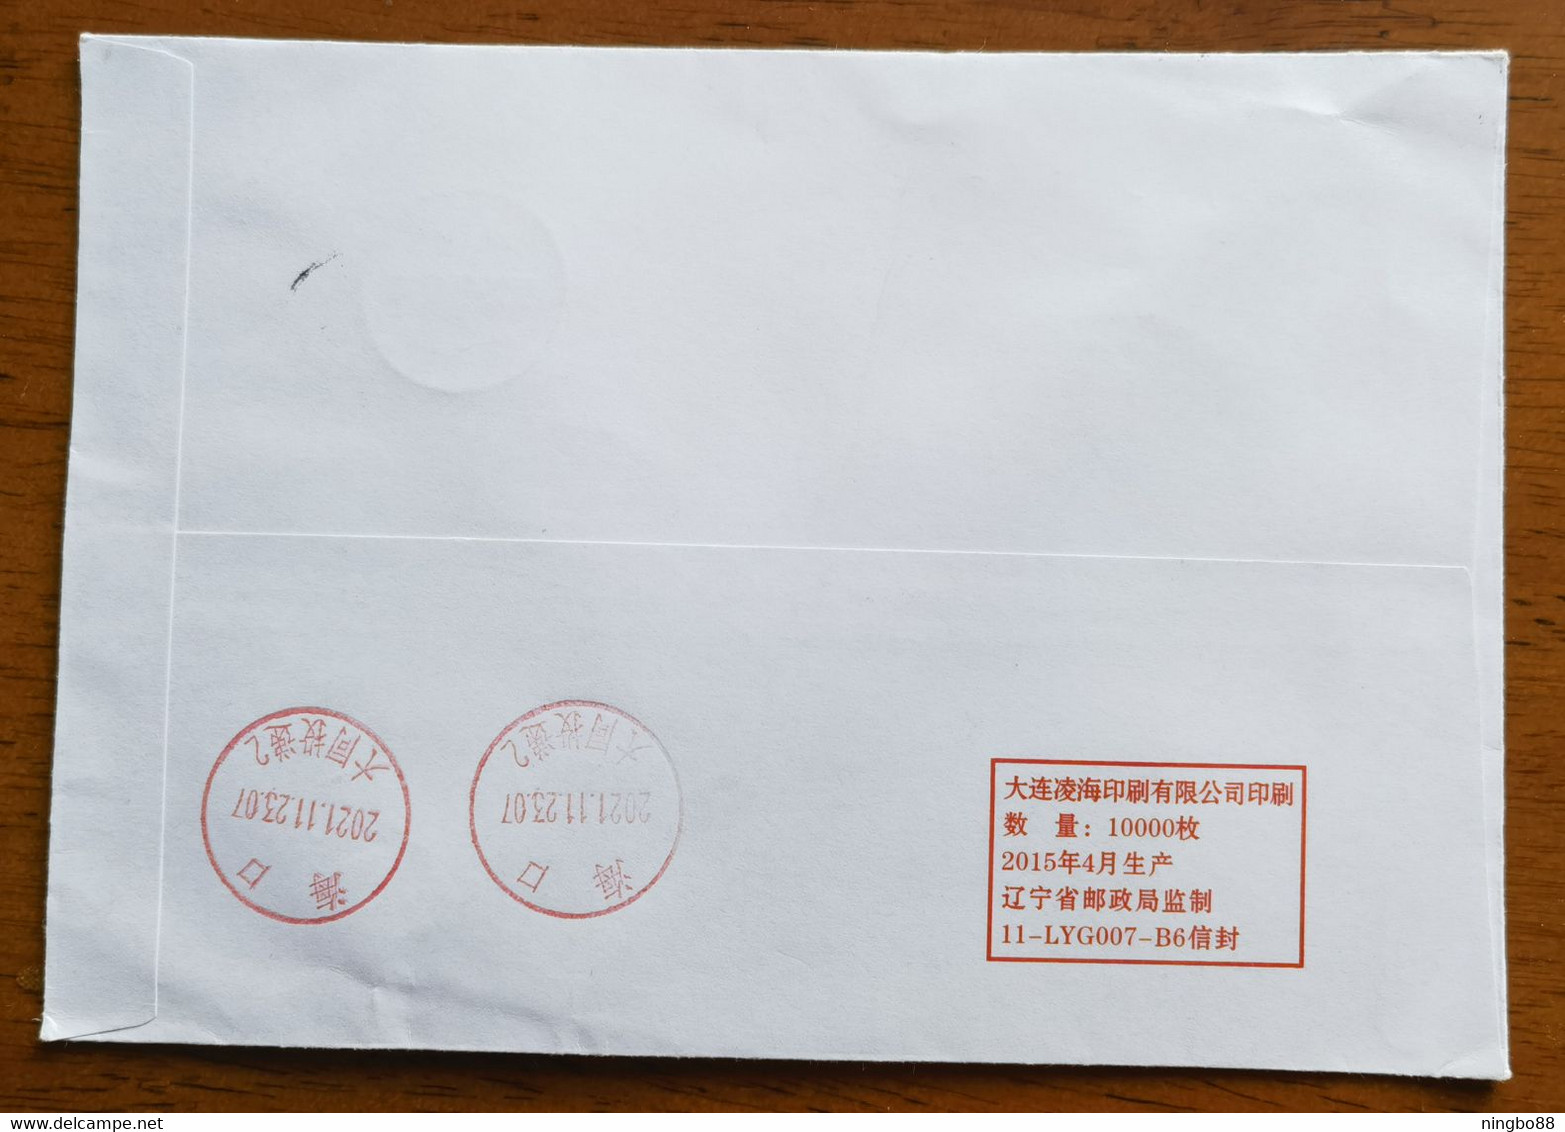 Mail Undeliverable And Returned Because Of COVID-19 In Ruili,CN 21 Ruili Post Fighting COVID-19 Propaganda Label Used - Disease